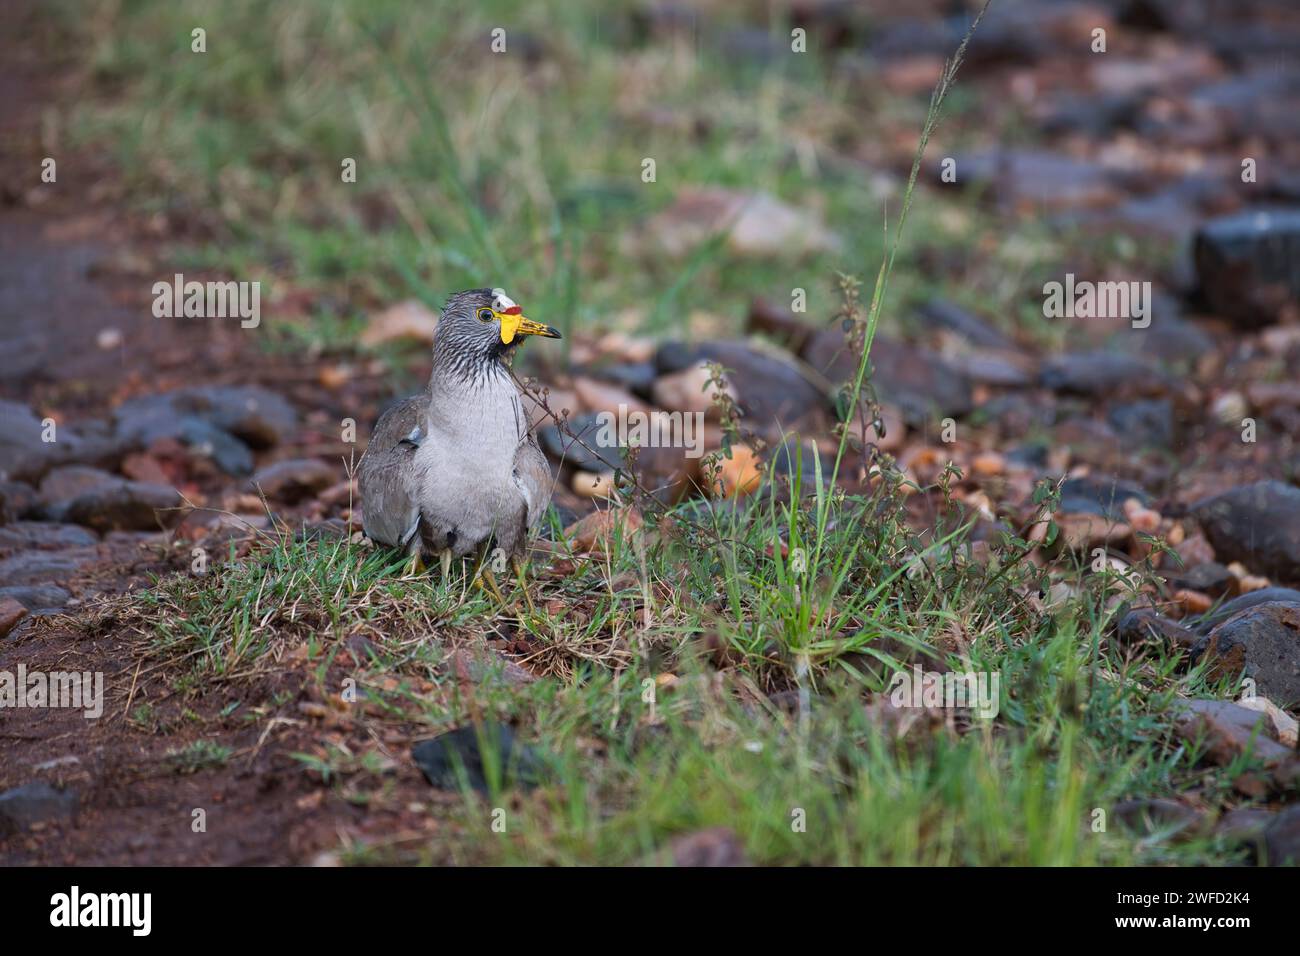 Wattled lapwing (Vanellus senegallus), parent bird with several chicks sheltering under body during a rainstorm. Legs of the young are visible. Stock Photo